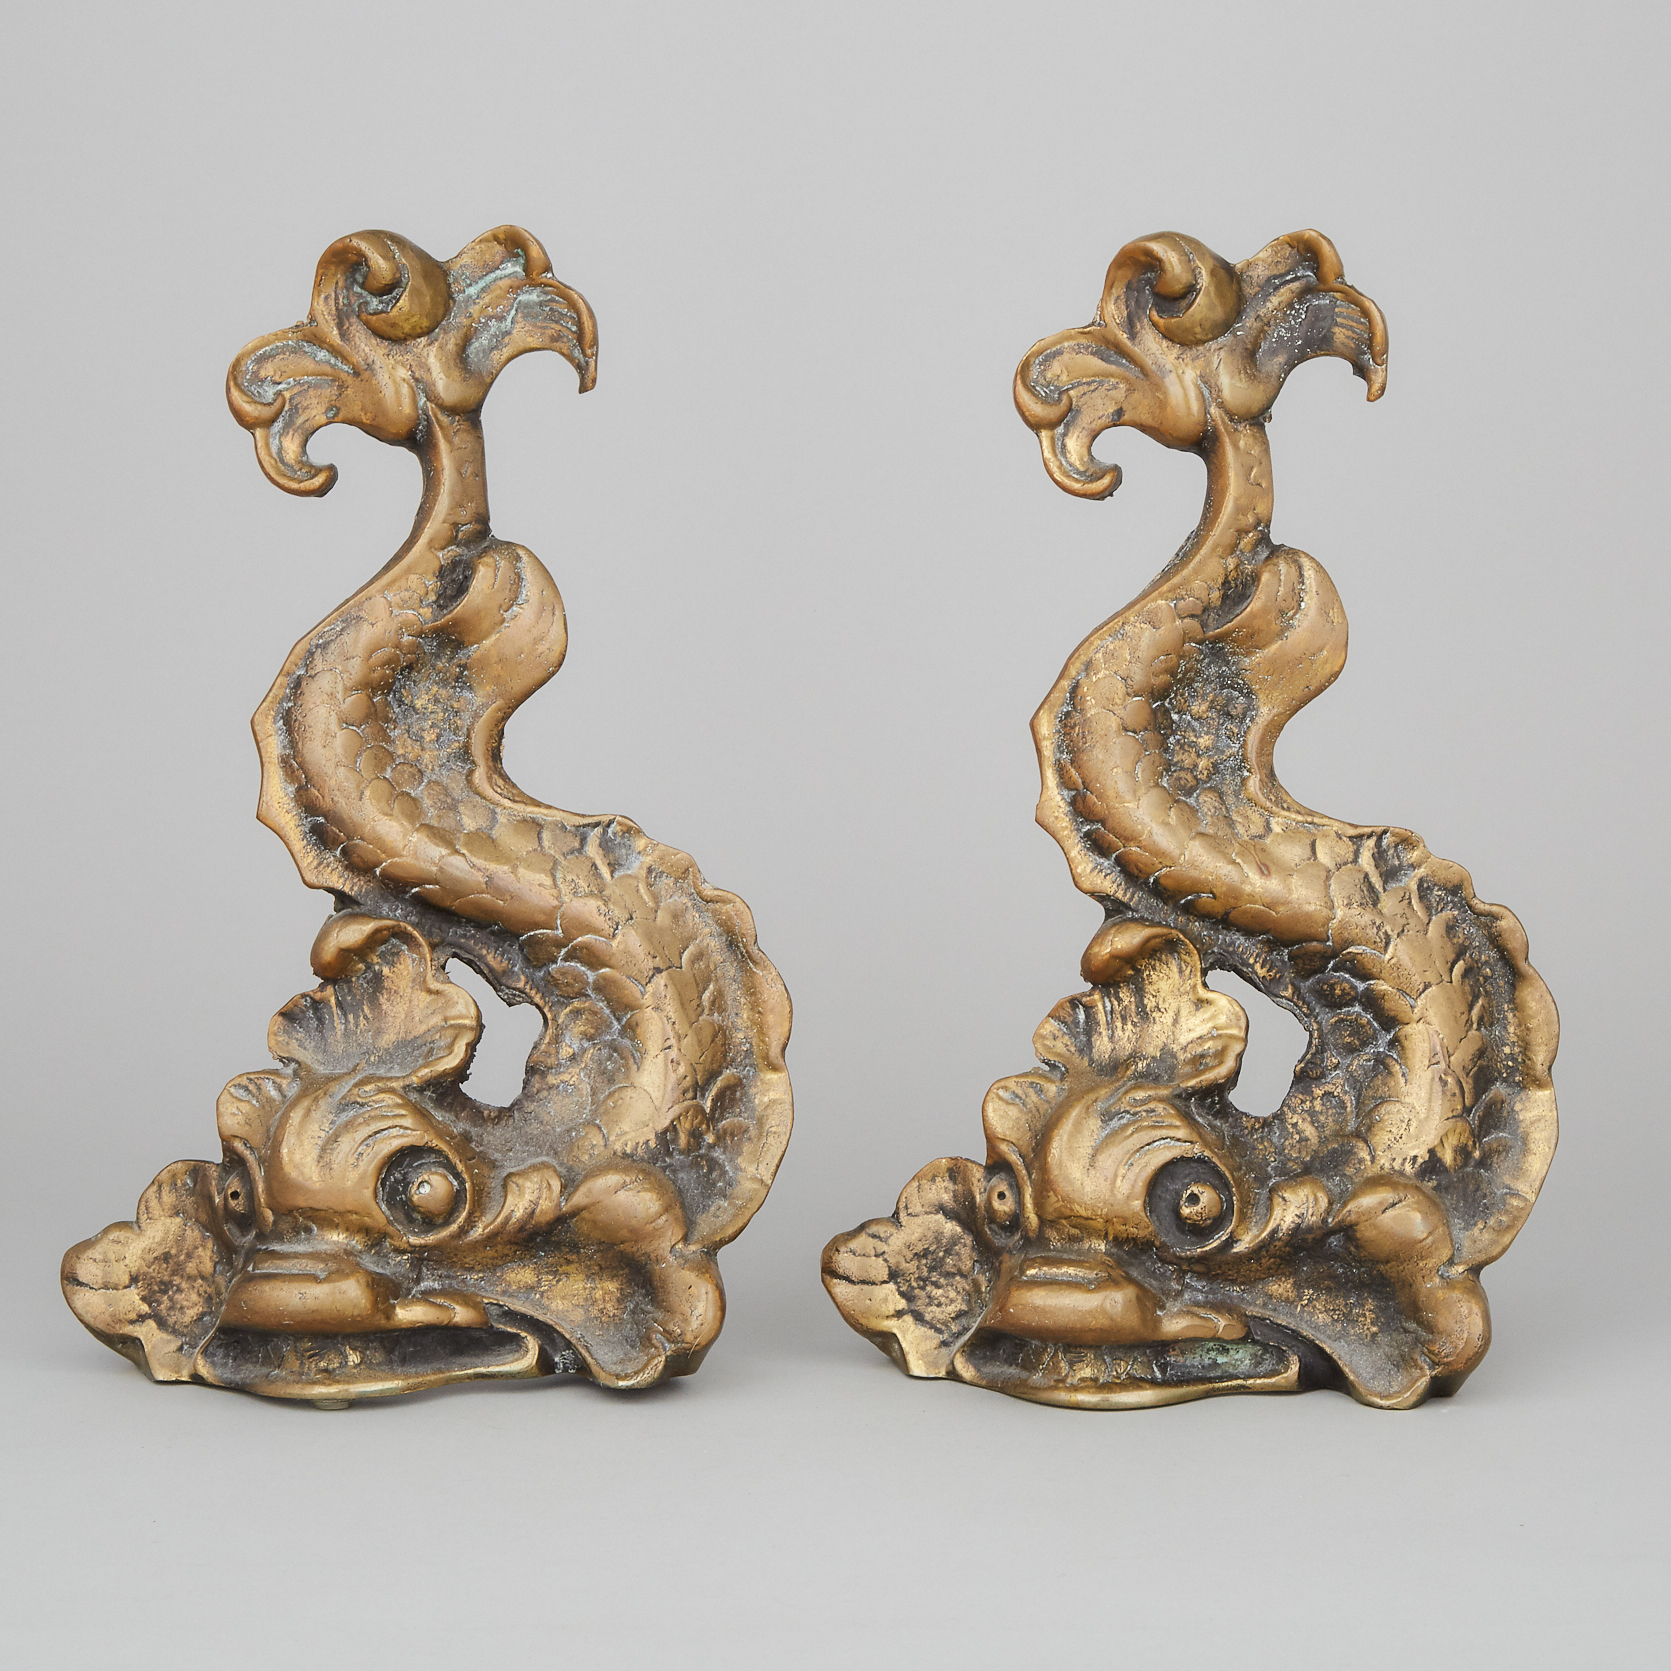 Pair of English Gilt Brass Dolphin Form Doorstops, early 20th century